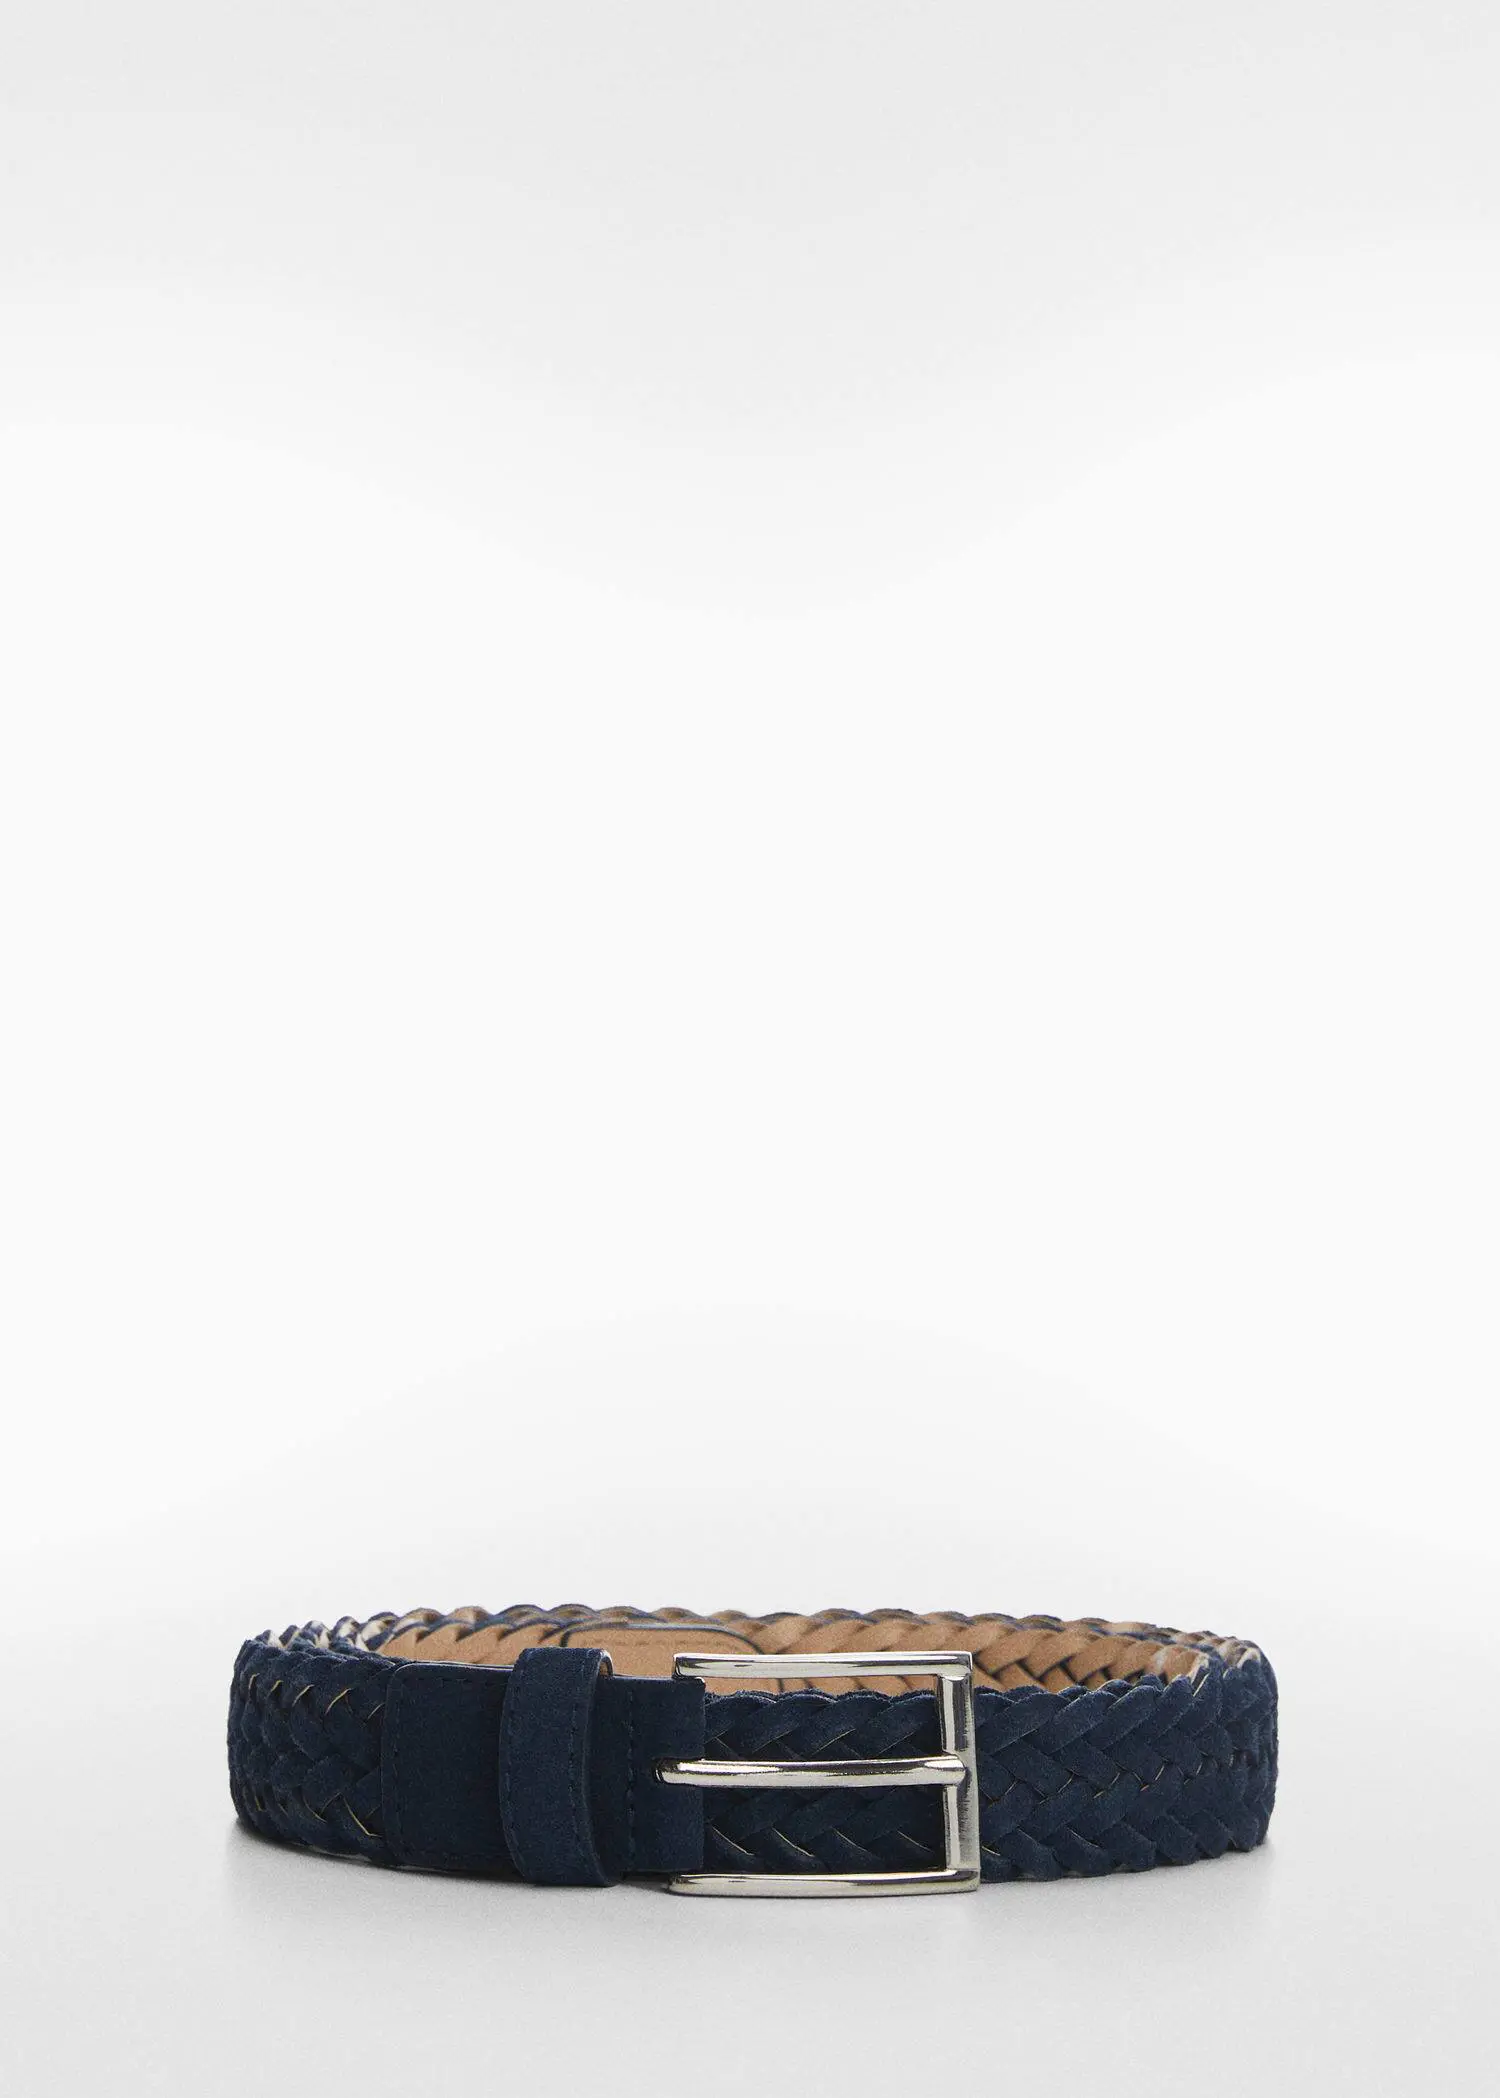 Mango Braided suede belt. a close up of a belt on a white background 